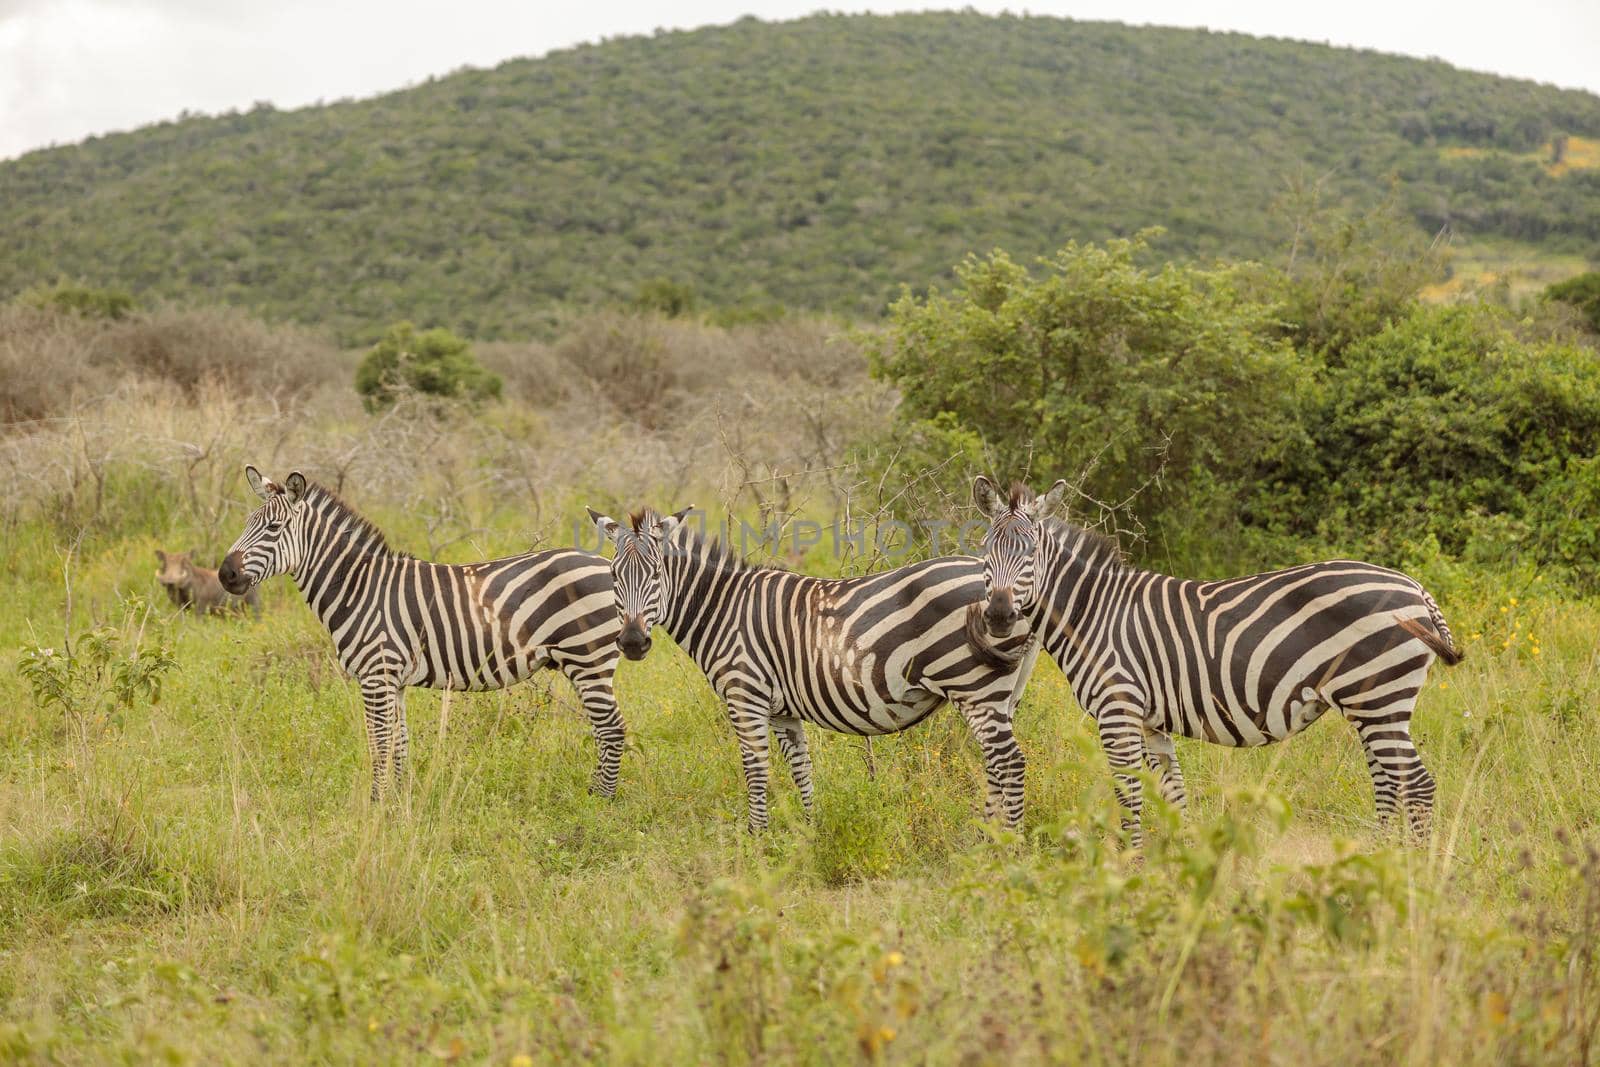 Herd of zebras on the african savannah with a wild boar in the background